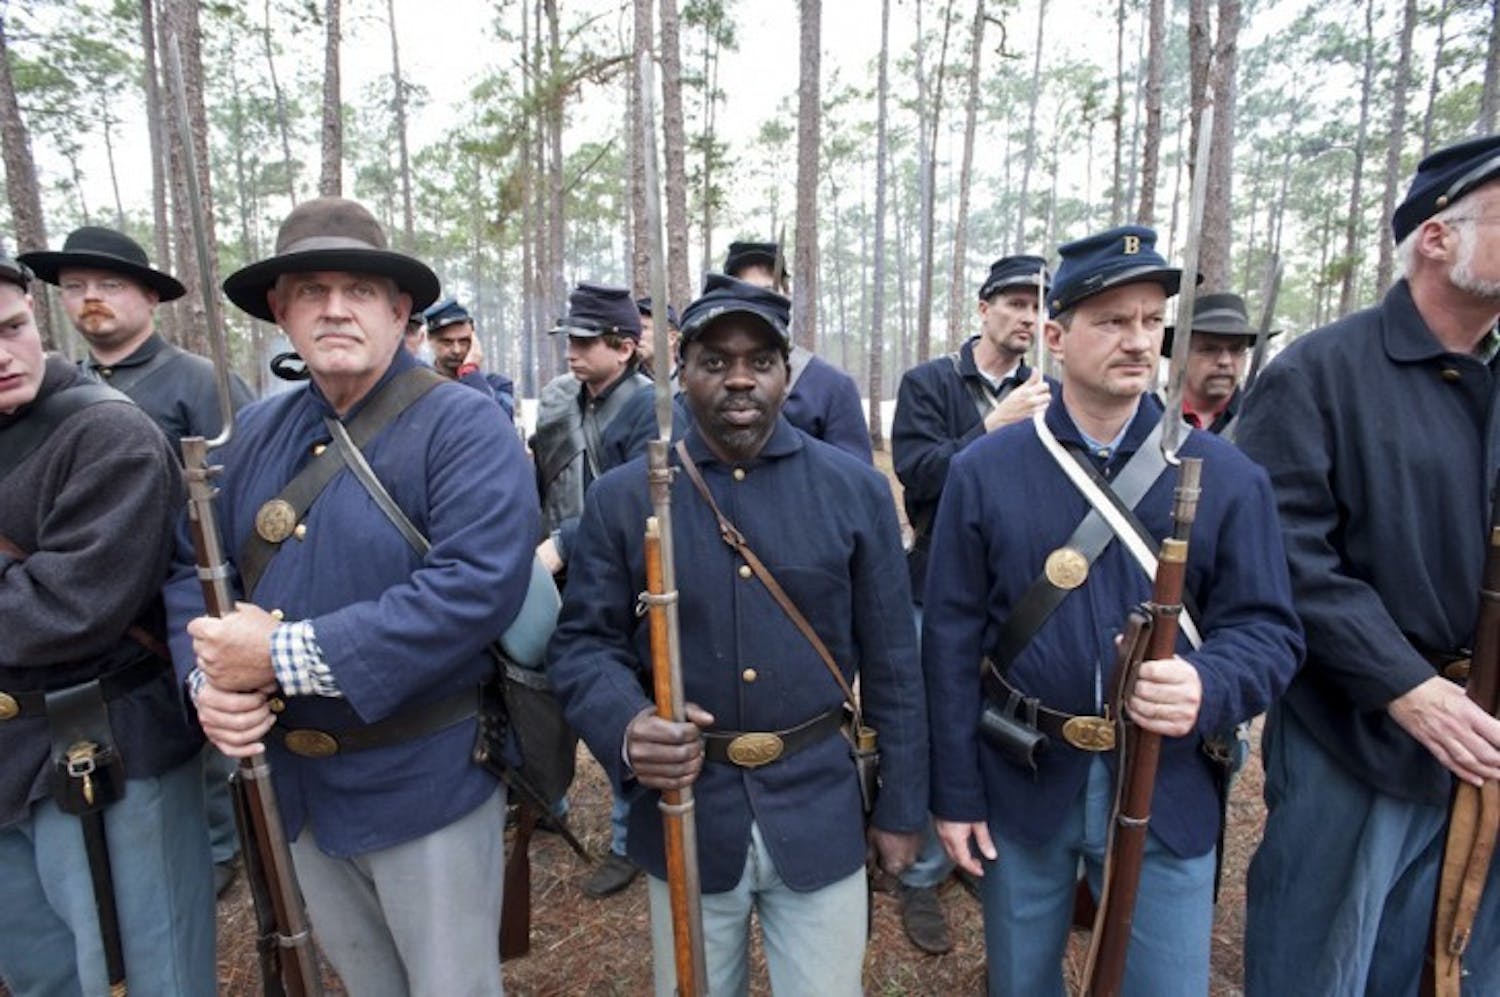 Edgar McCray, of the 54th Regiment Massachusetts Volunteer Infantry, stands in formation during an afternoon inspection Saturday.
&nbsp;